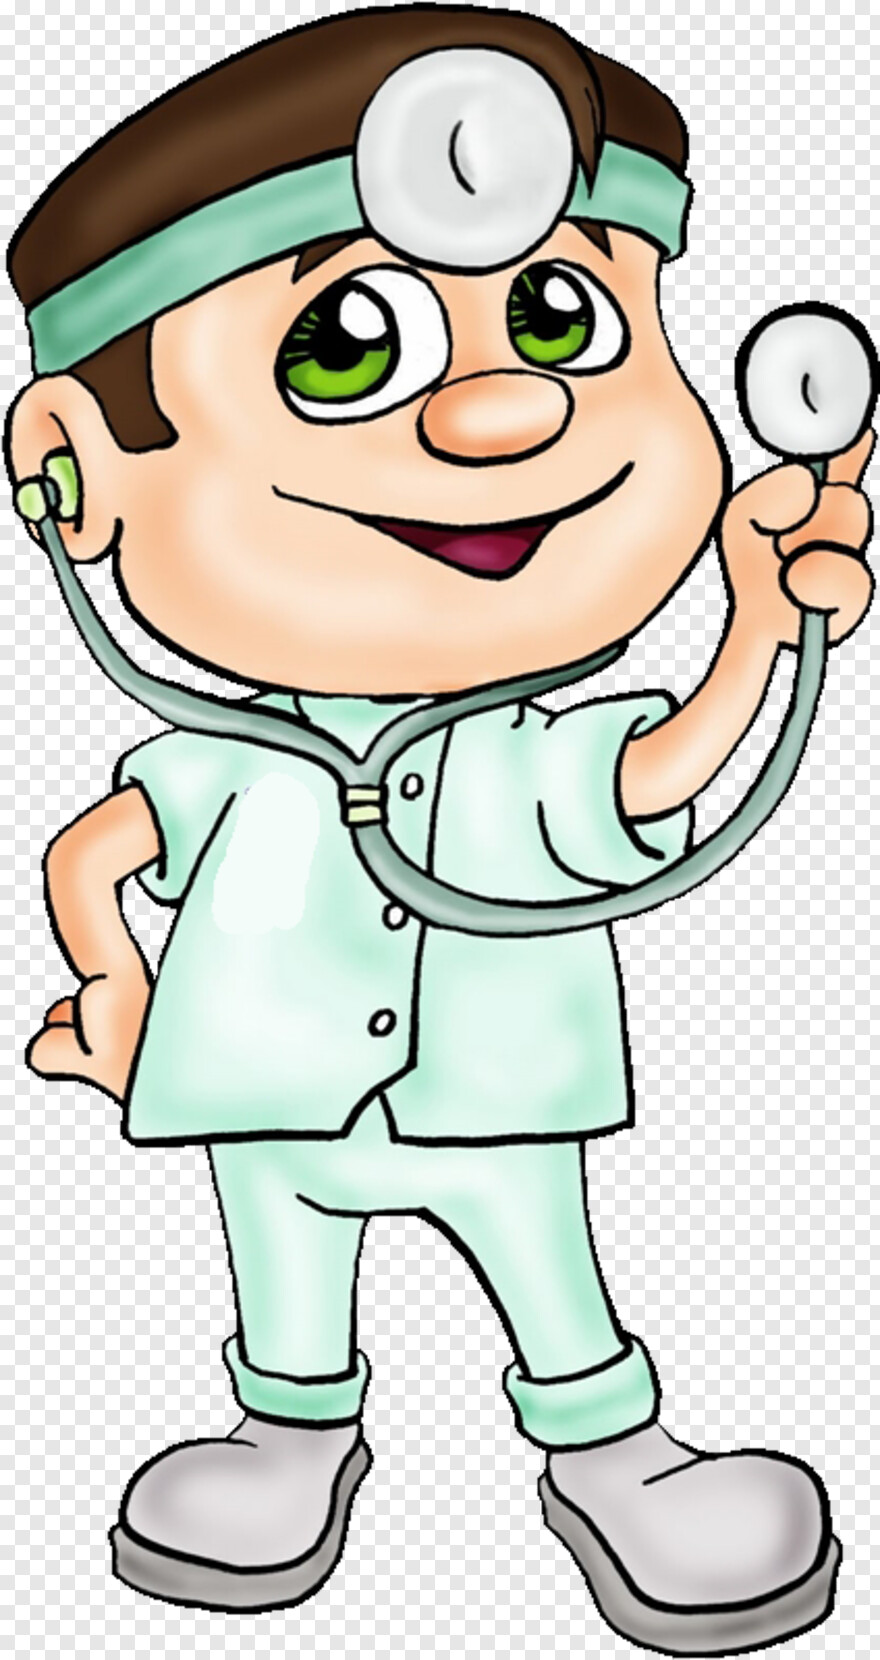 doctor-clipart # 897519